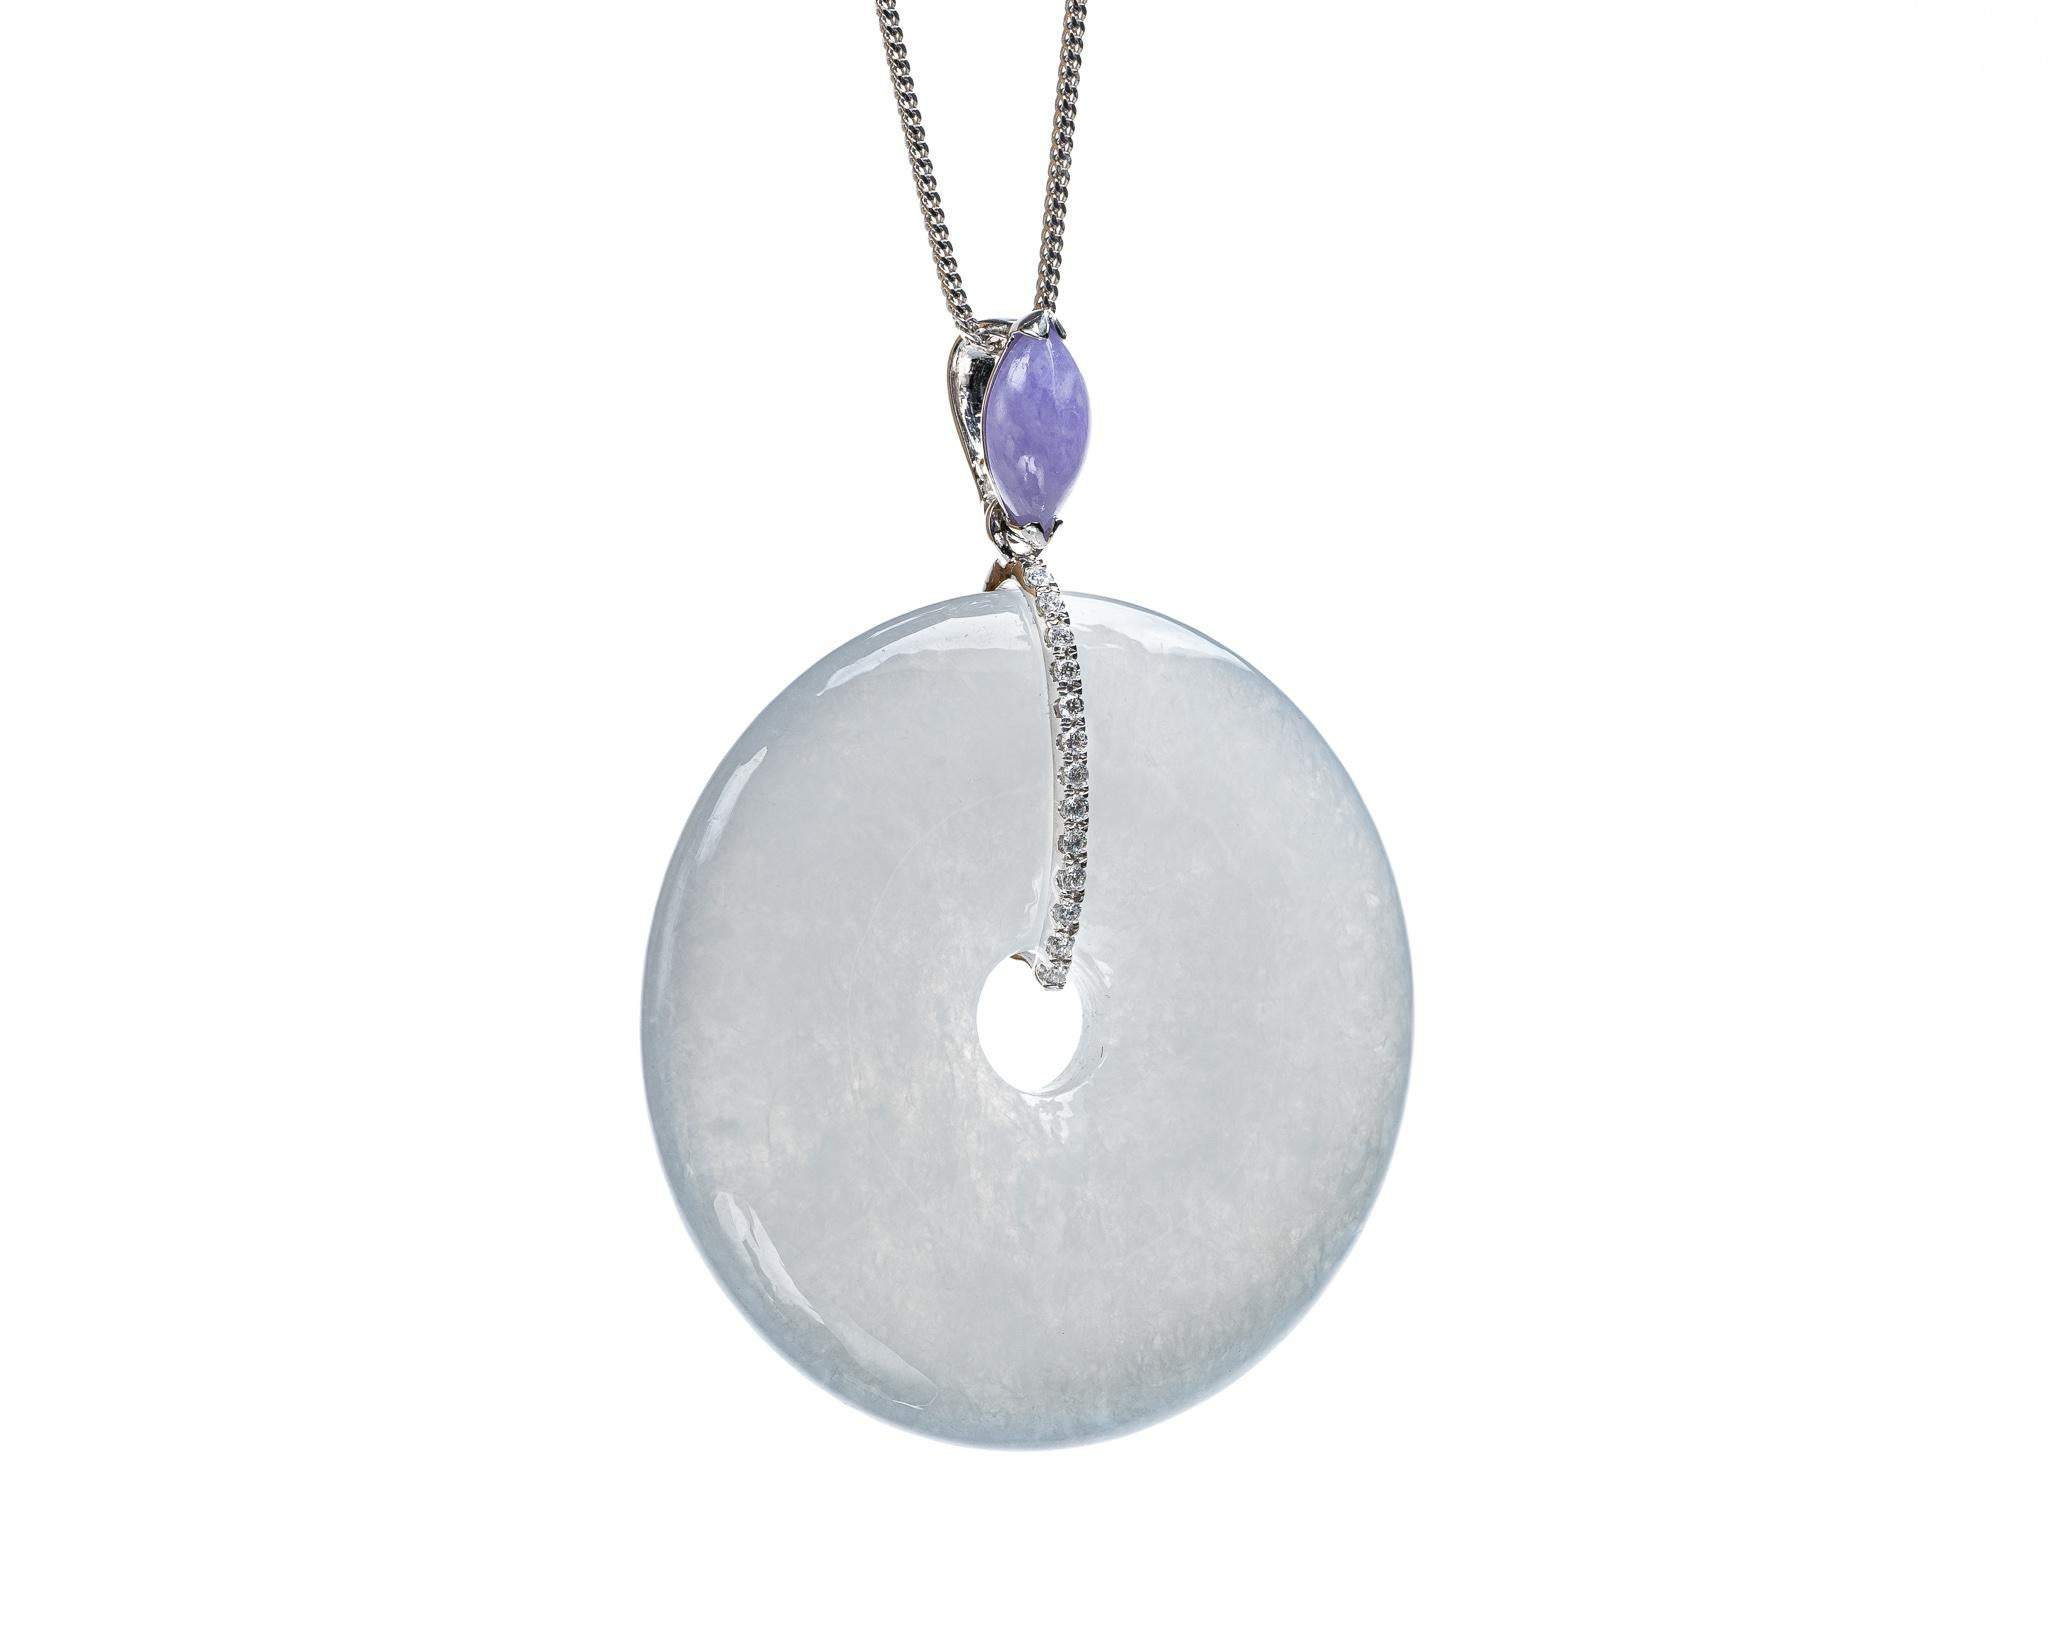 This is an all natural, untreated jadeite jade carved pi disc with lavender marquis pendant set on an 18K white gold bail.  The carved pi disc symbolizes peace and harmony.  

It measures 1.74 inches (44.3 mm) x 2.31 inches (58.8 mm) with thickness